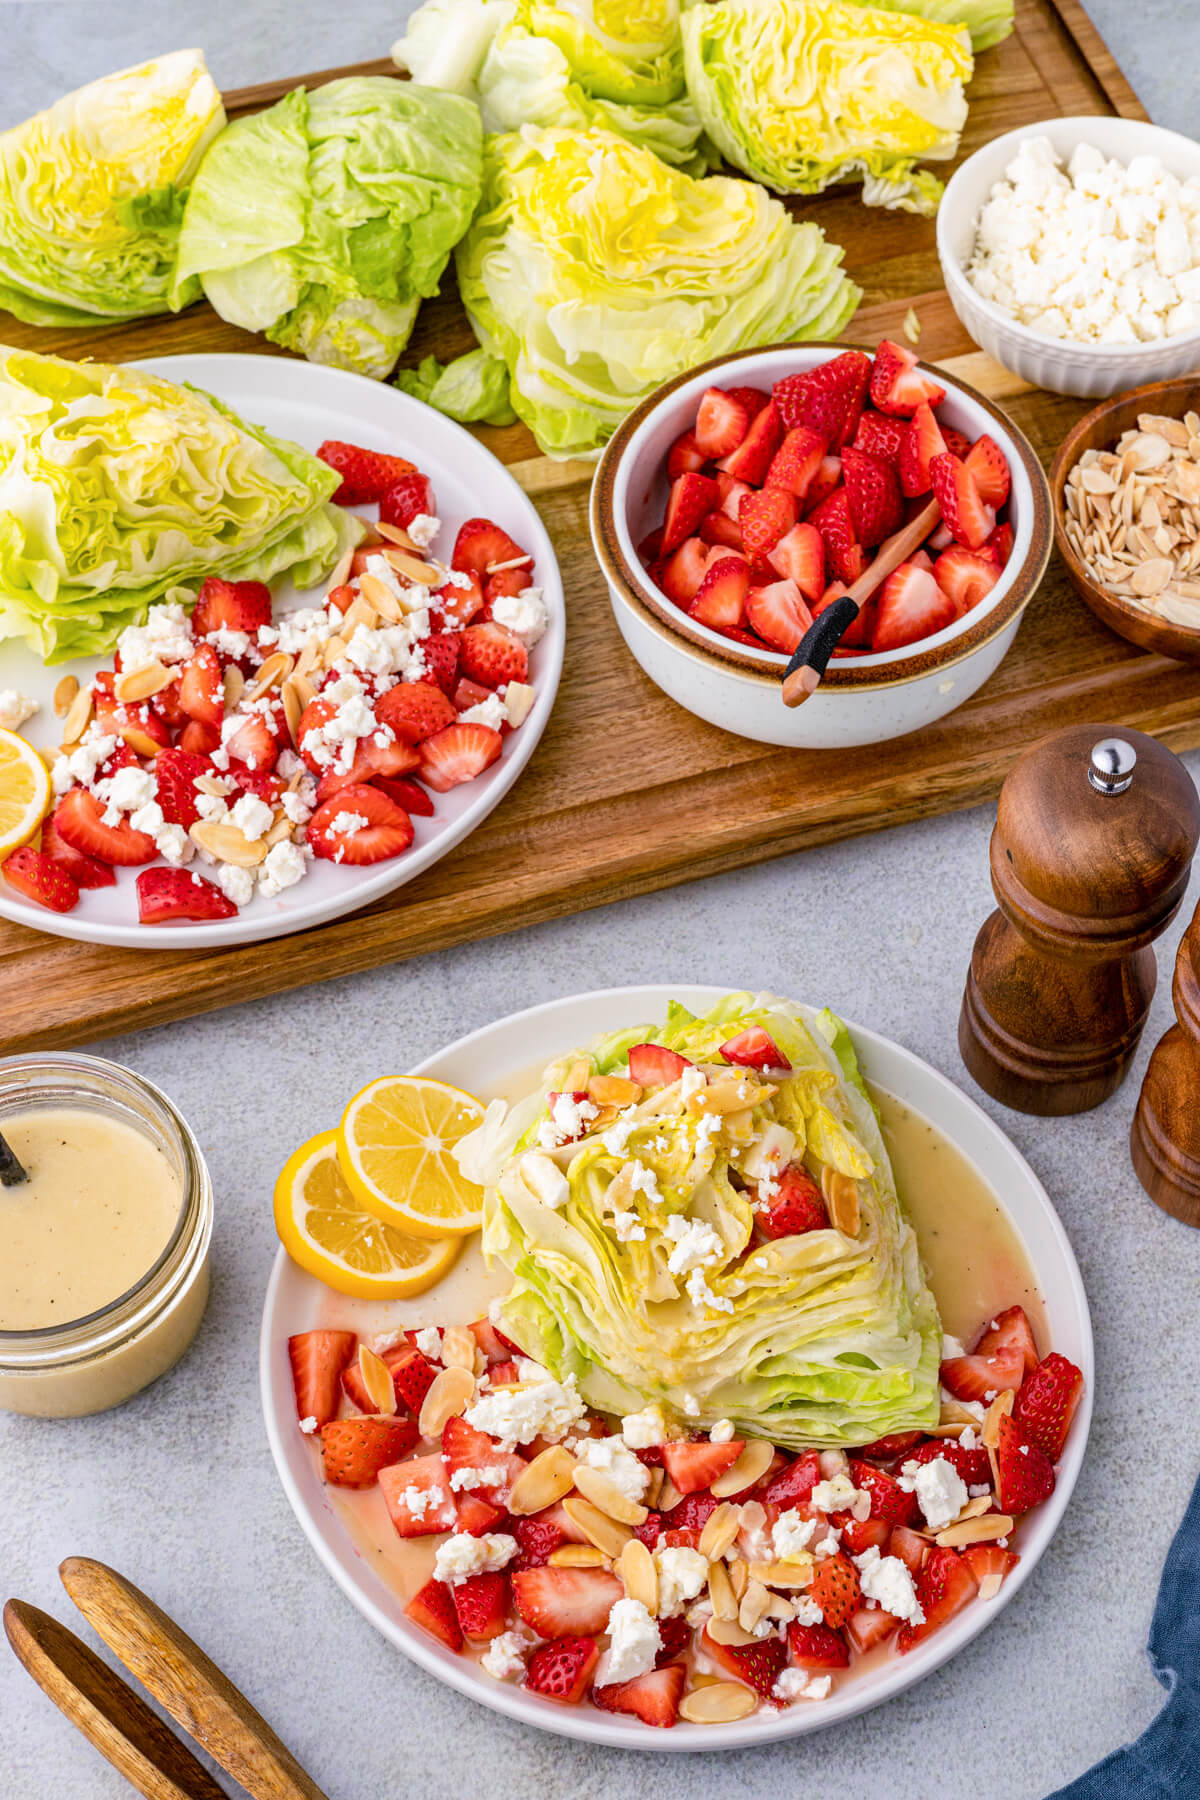 A Strawberry Feta Wedge Salad on white plate in front of a salad serving board.